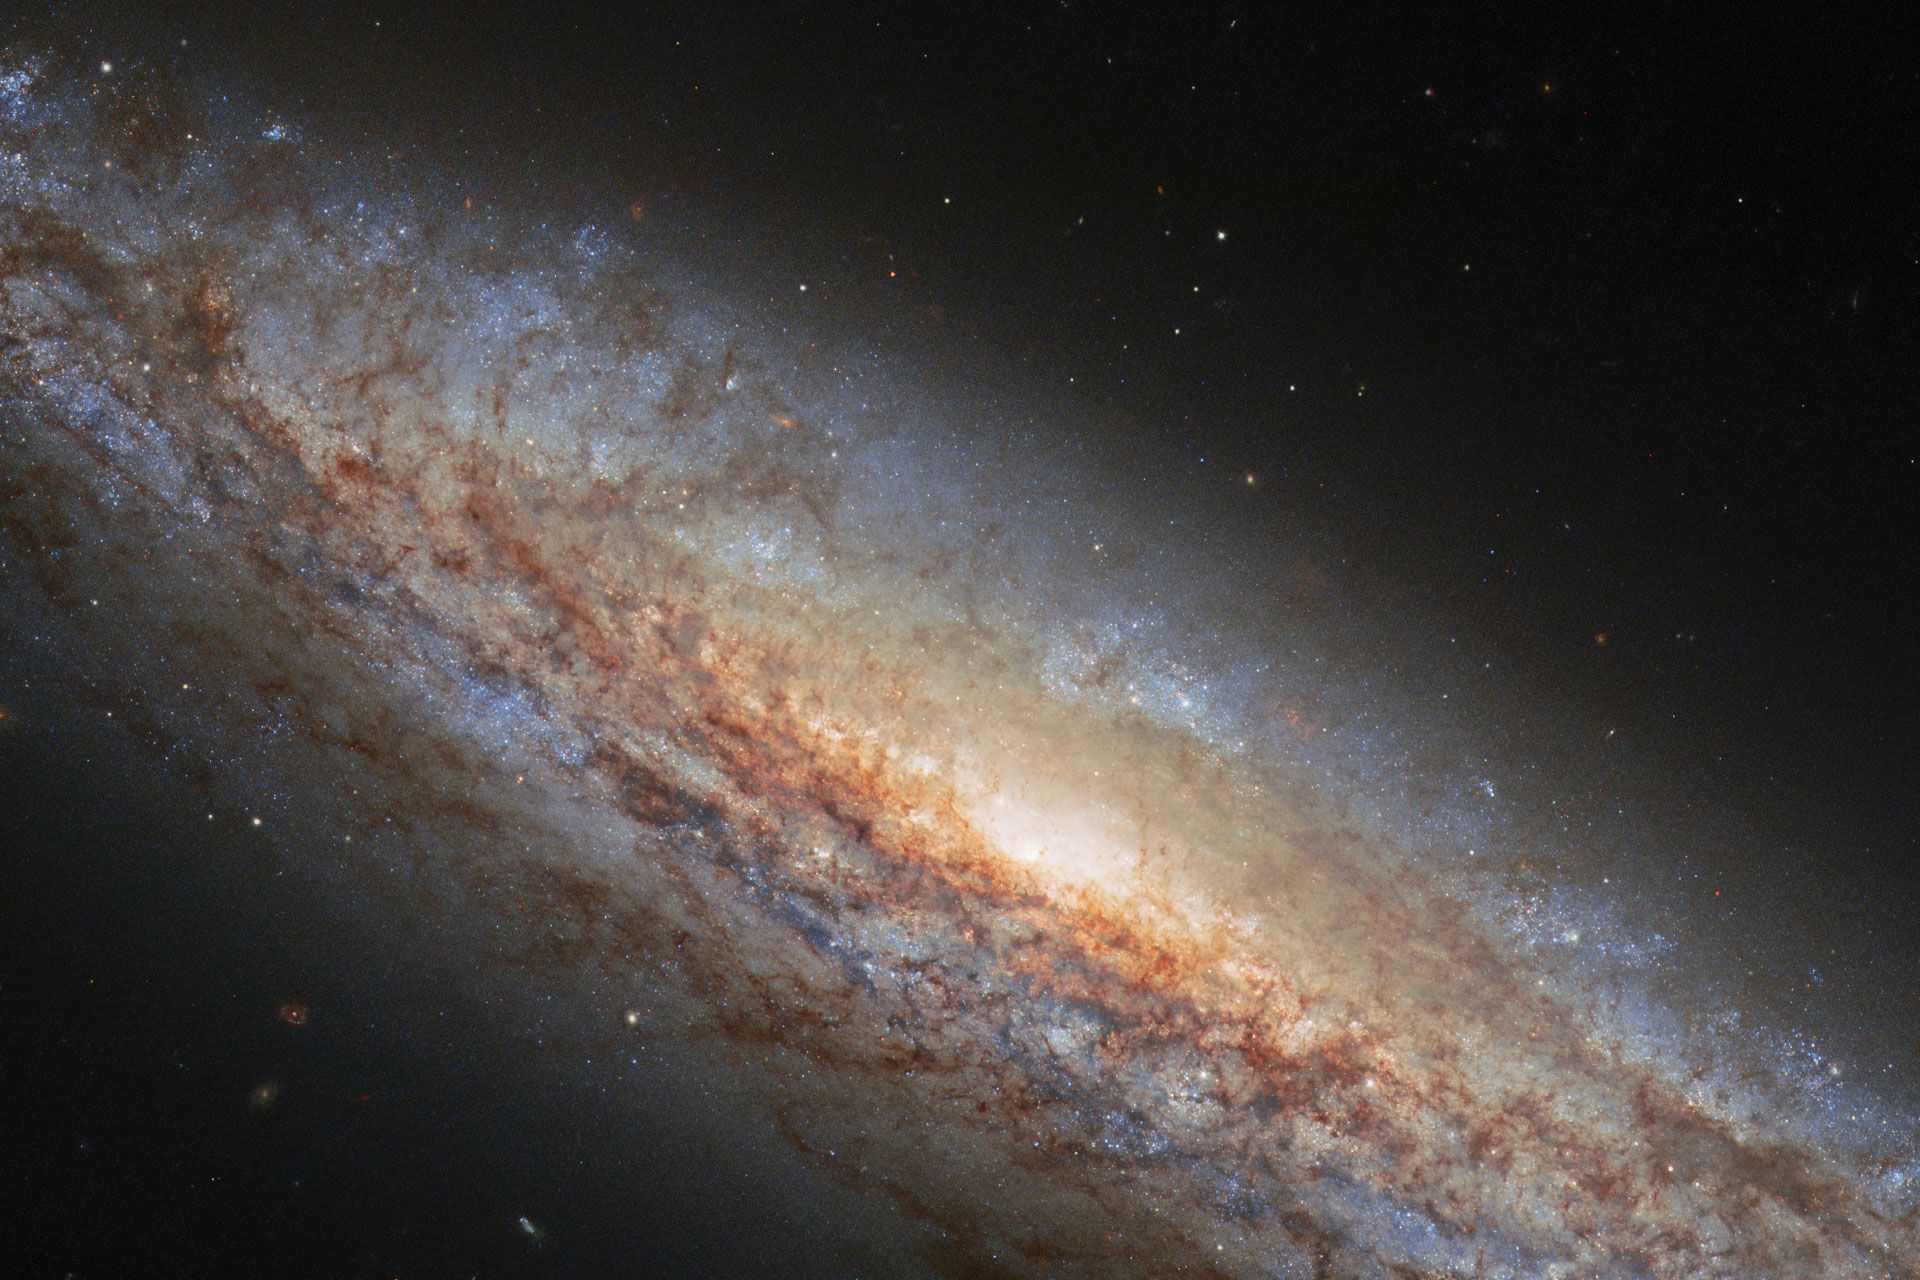 Hubble image of the spiral galactic center